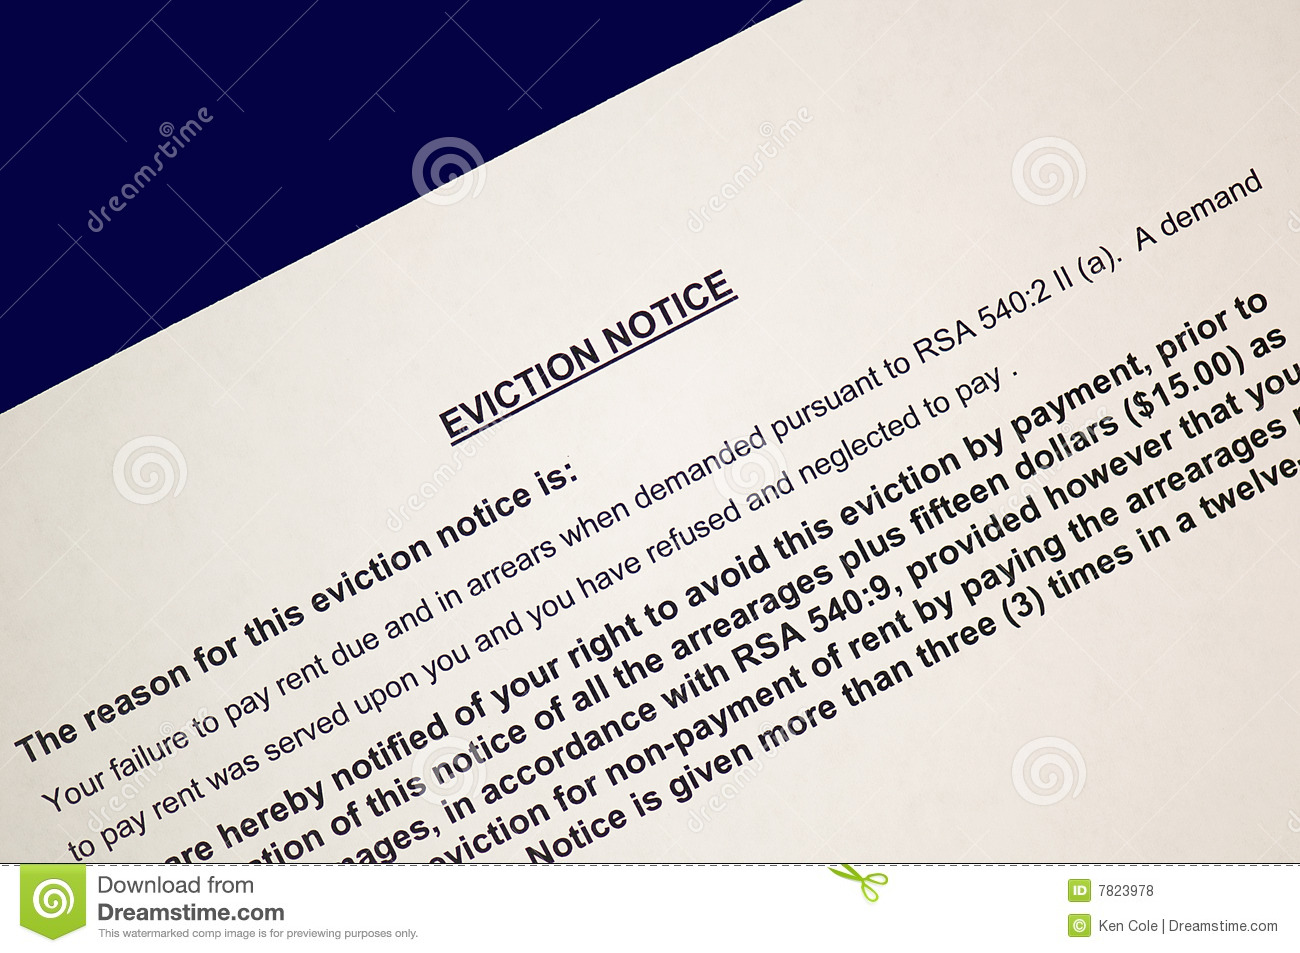 Legal Eviction Notice Royalty Free Stock Photos   Image  7823978